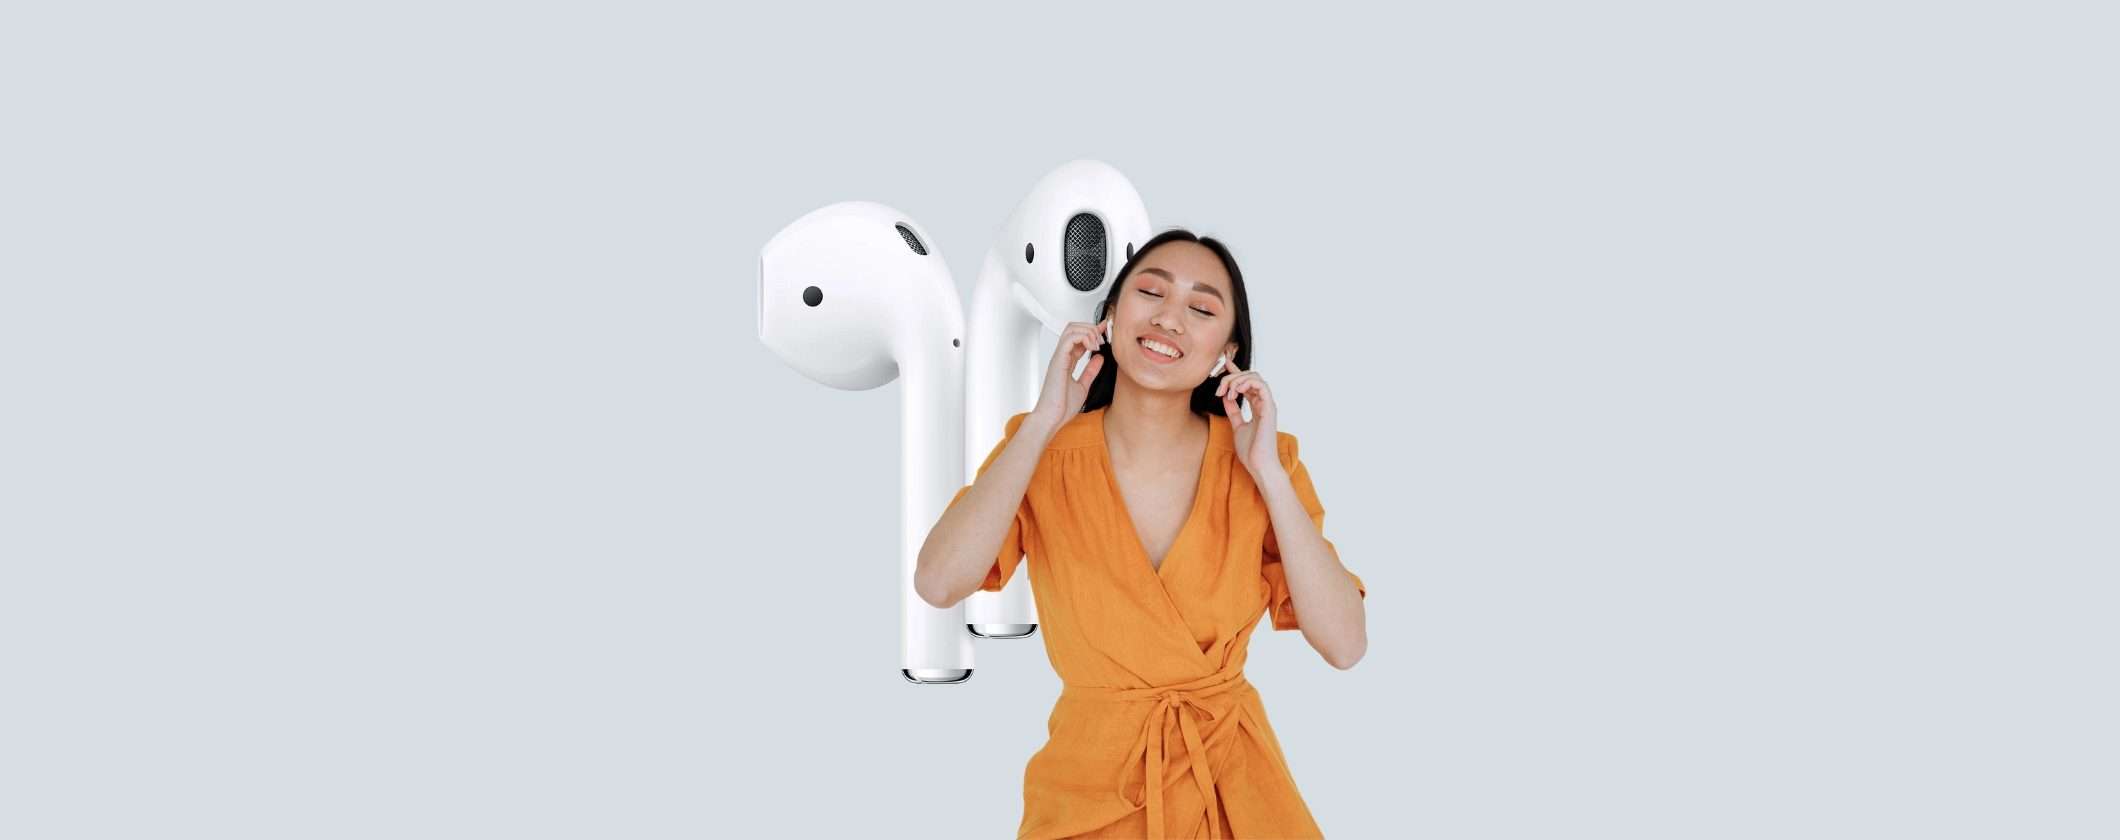 Apple AirPods 2: TOP SELLER a prezzo LOW COST